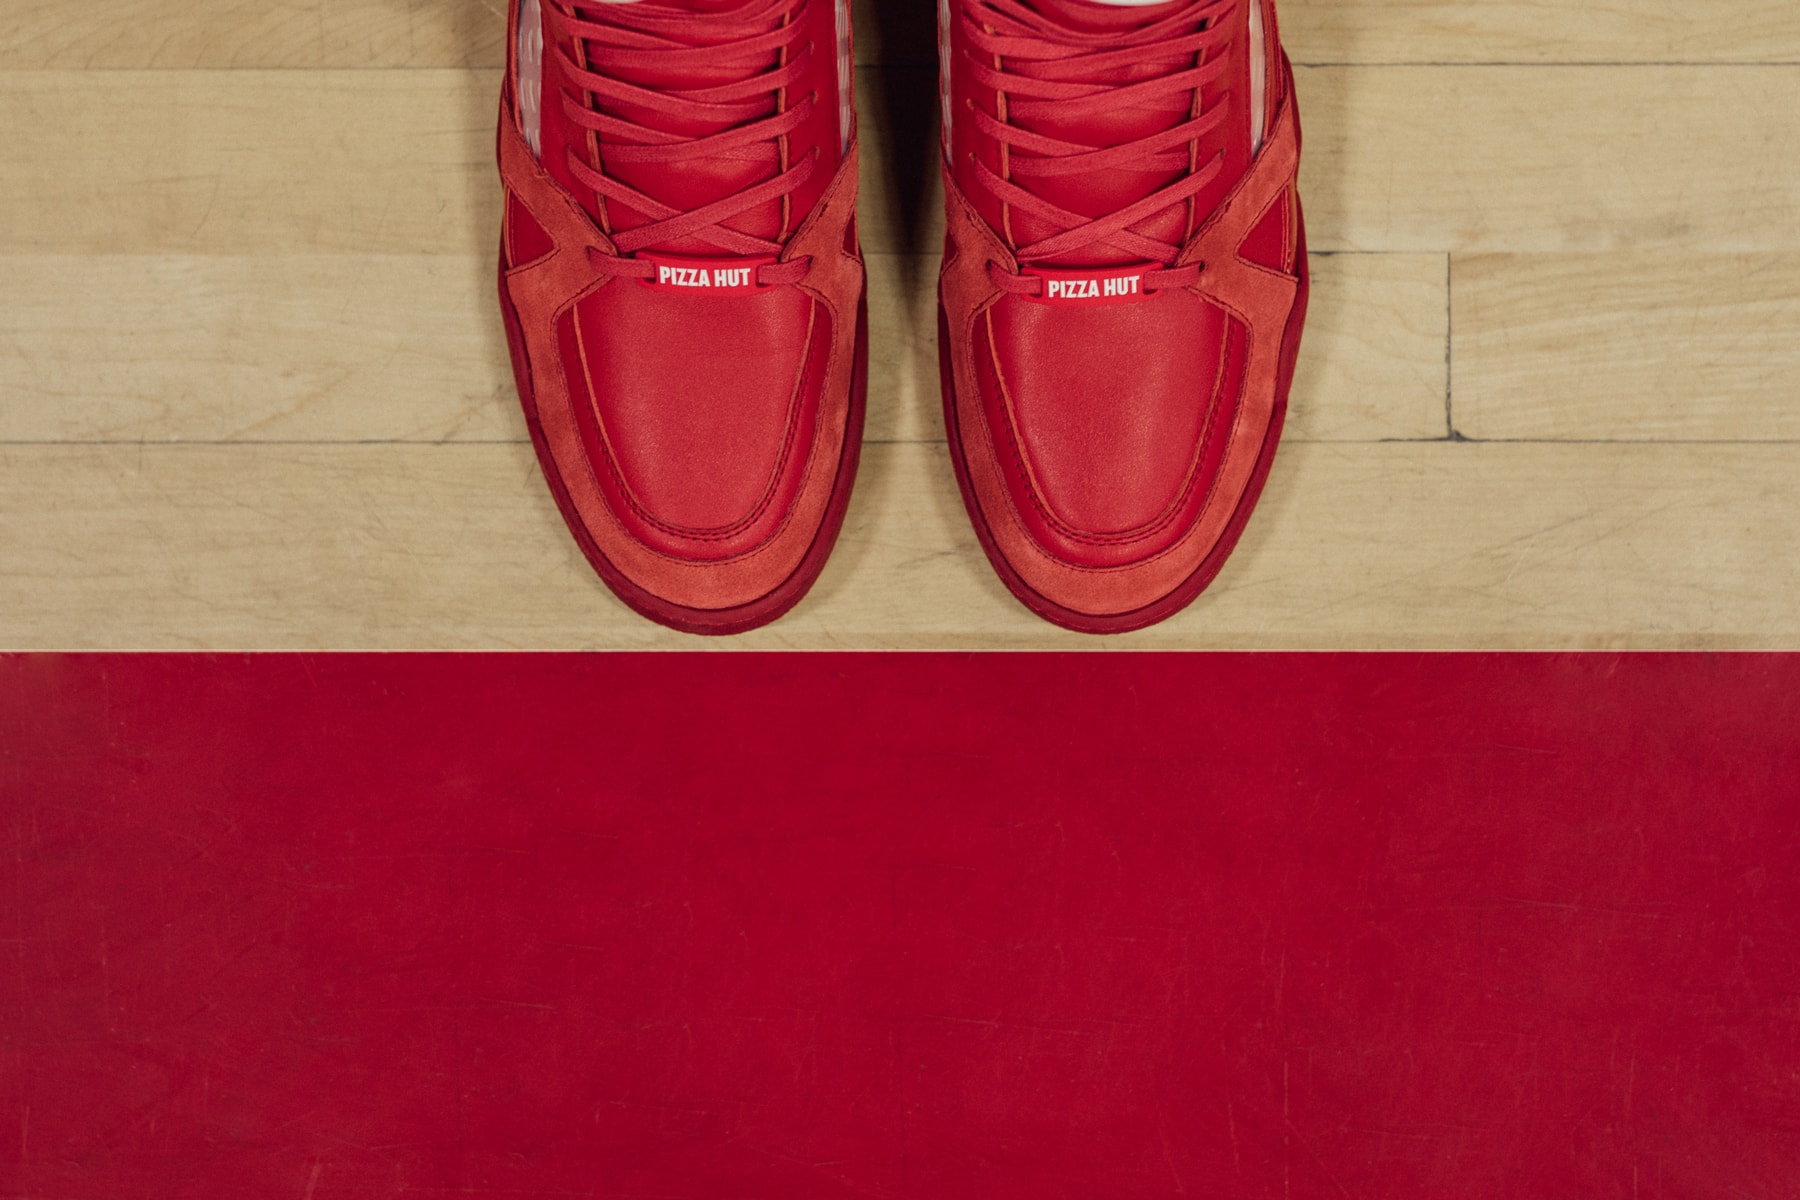 pizza hut pietop 2 closer look sneakers basketball red marinara wheat patent nubuck leather suede wax ncaa march madness